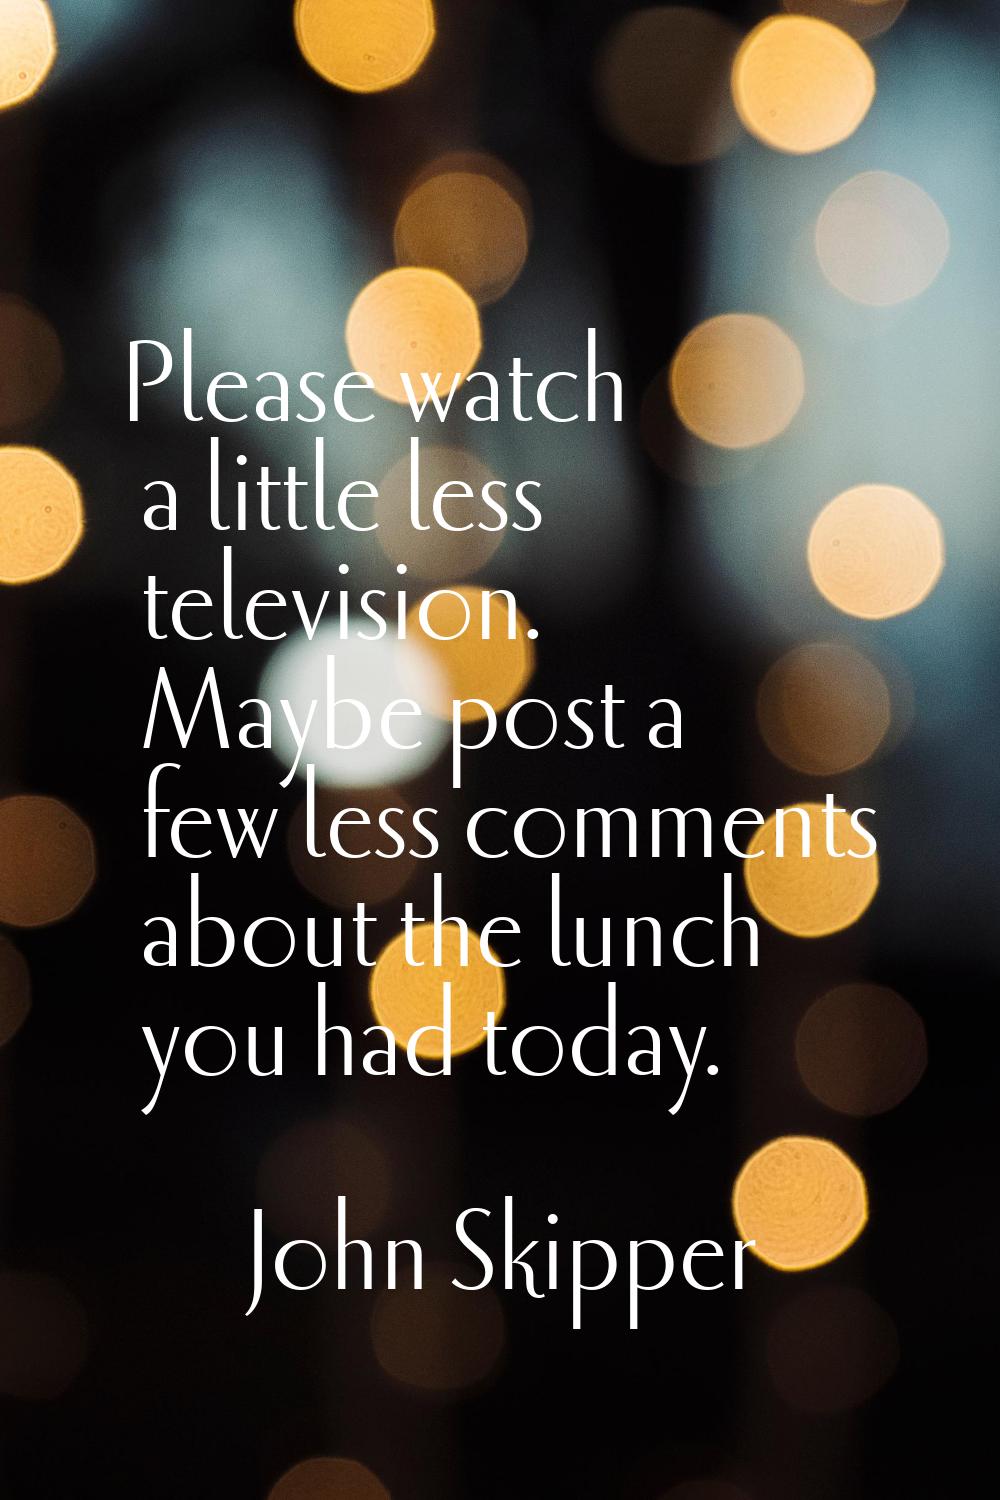 Please watch a little less television. Maybe post a few less comments about the lunch you had today